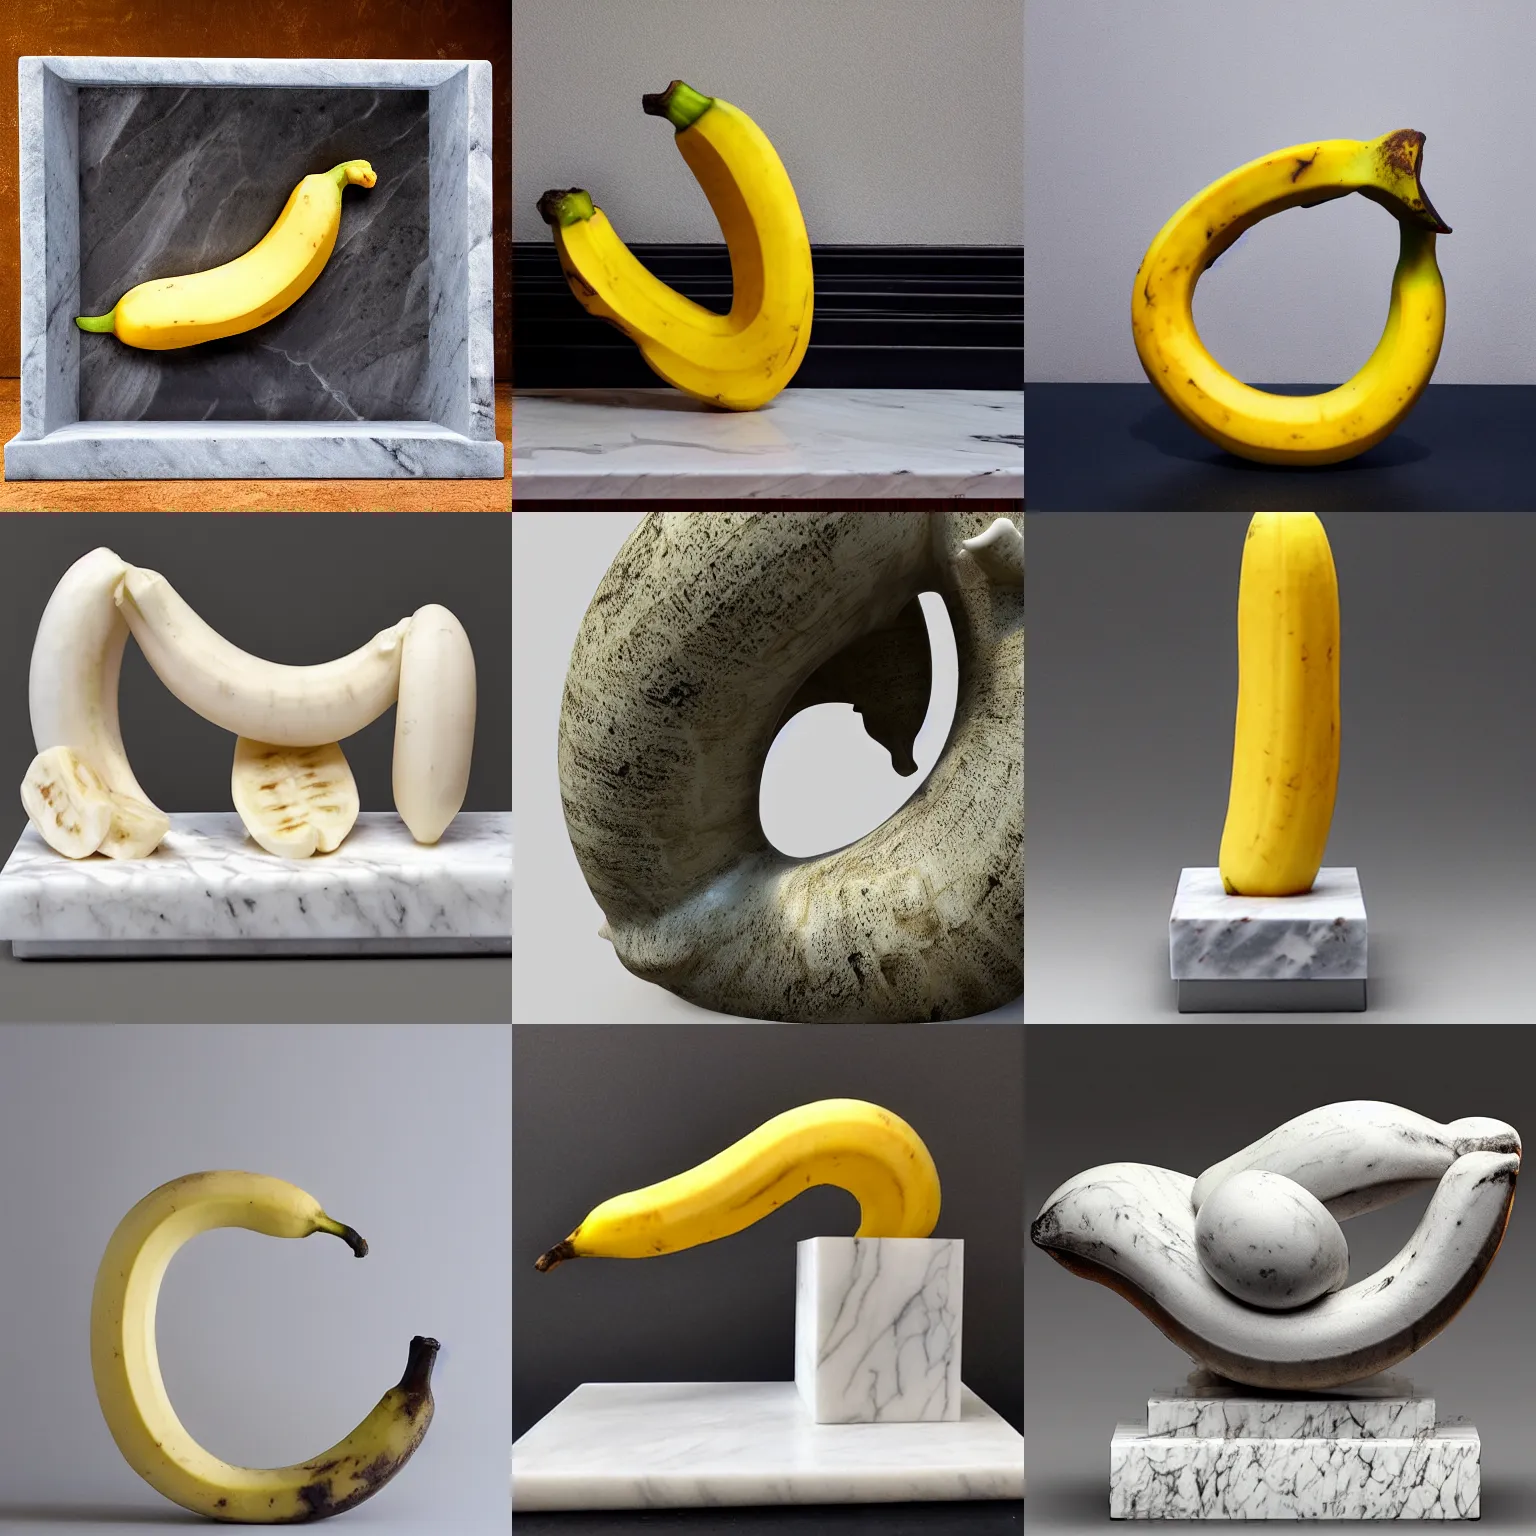 Prompt: marble sculpture of a banana